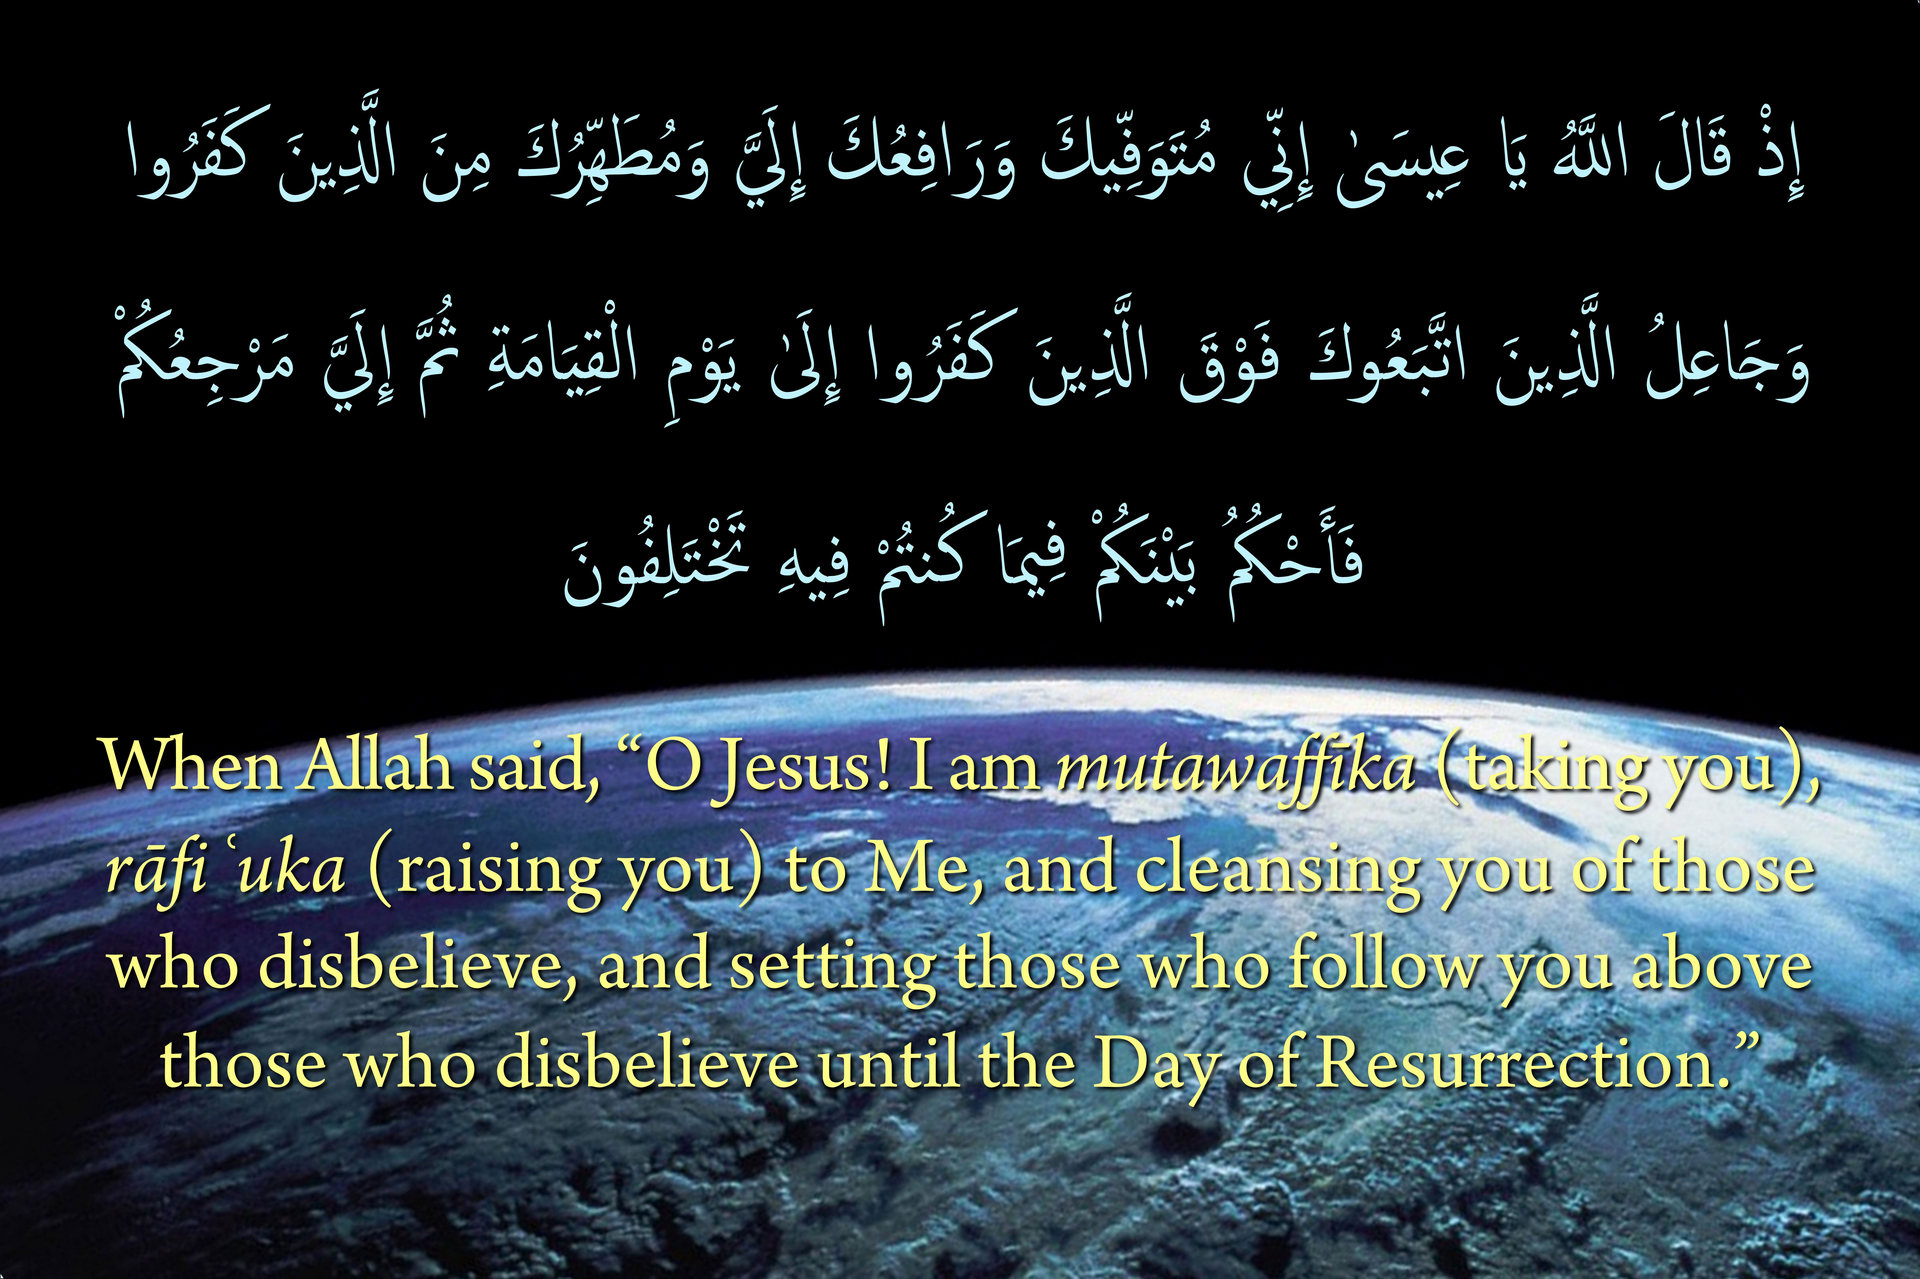 The End of Jesus’ Life on Earth in the Qur’an